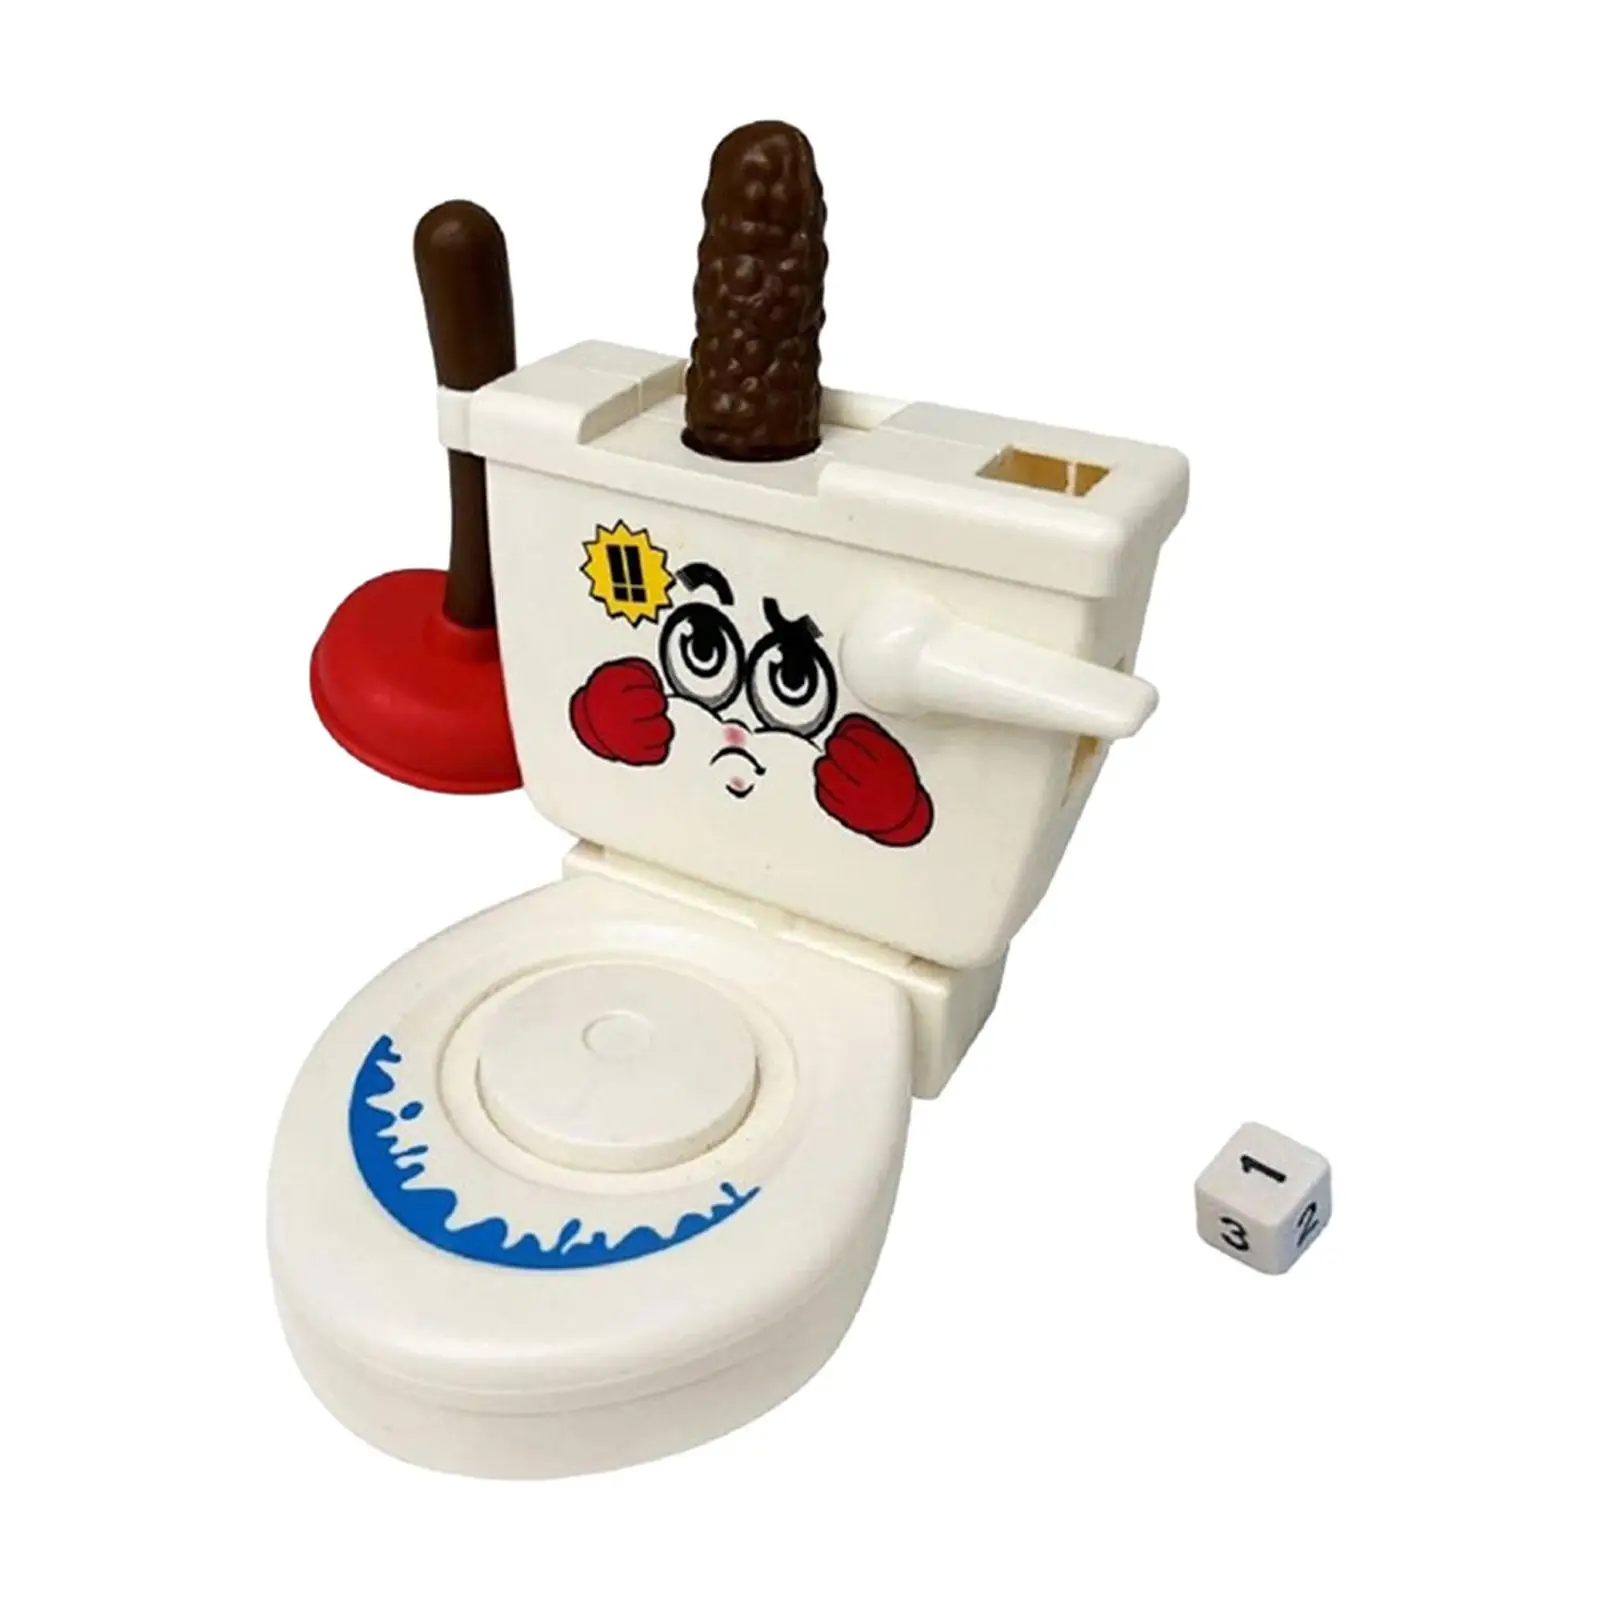 Toilet Game Toy Party Funny Toilet Poop Toys Simulation Toilet Ejection Toy for Children Todders Girls Boys Kid Birthday Gift